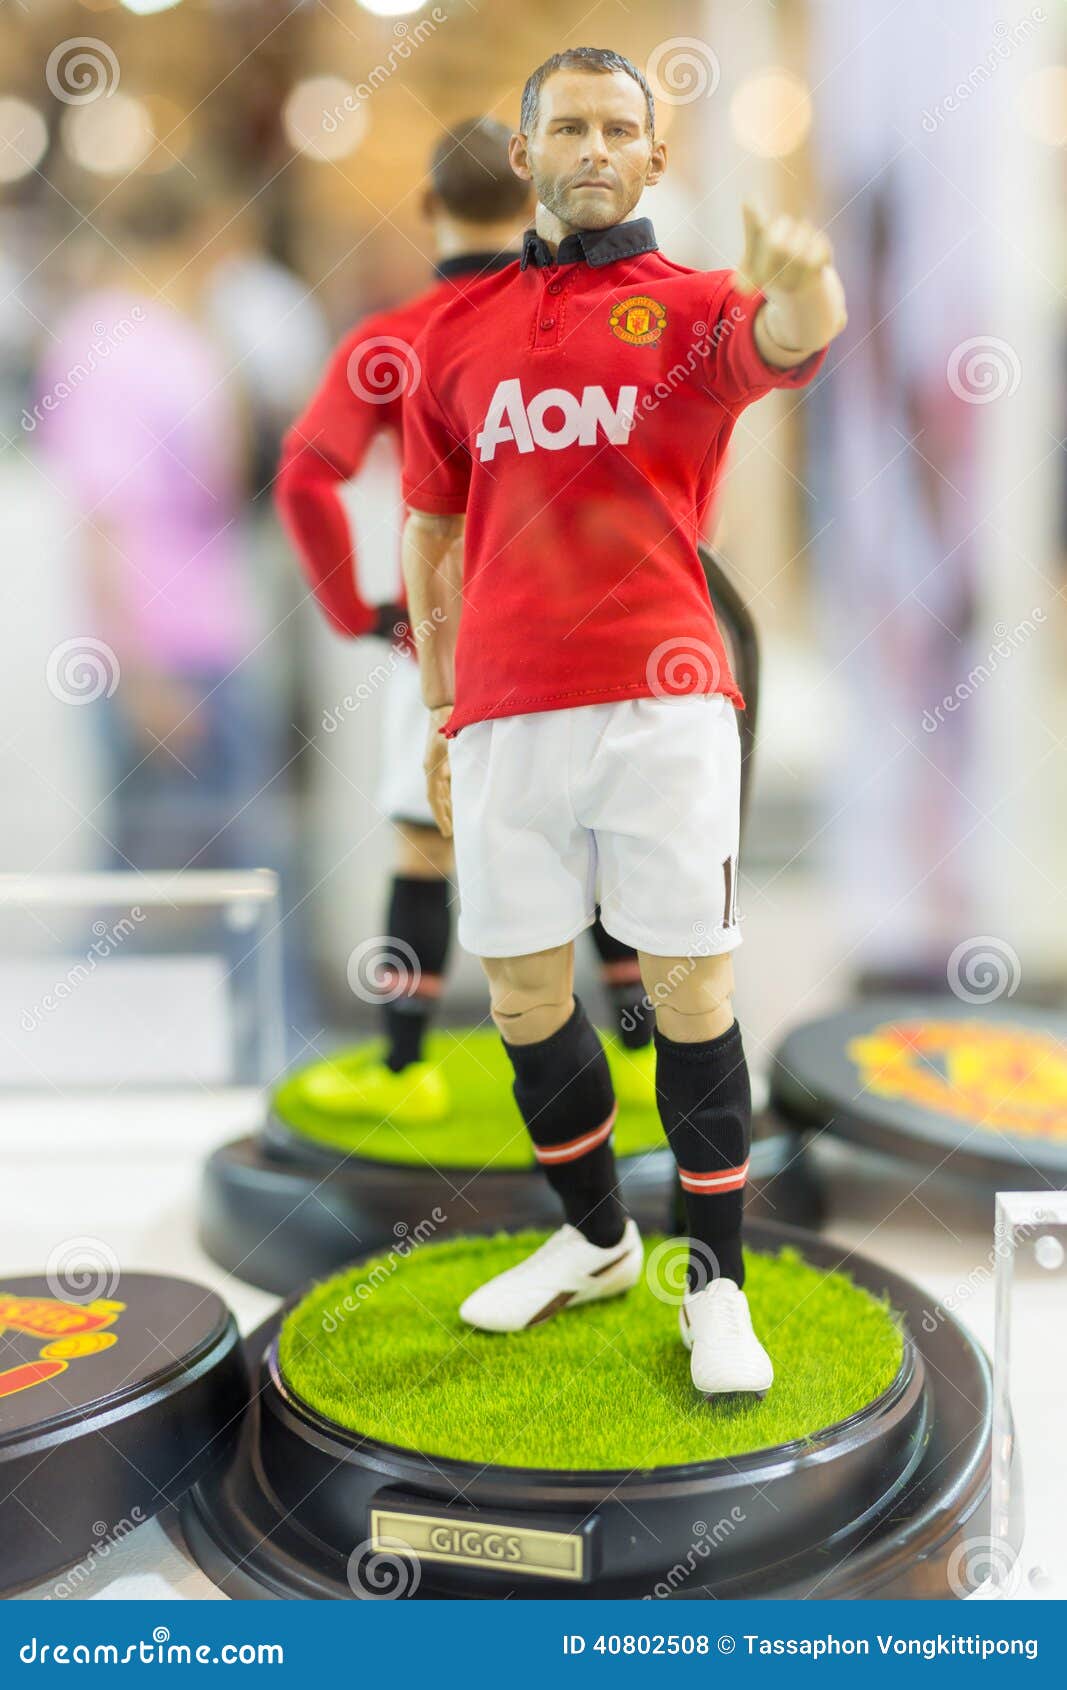 SoccerStarz Manchester United Rayan Giggs Home Kit Collectible Toy Figure